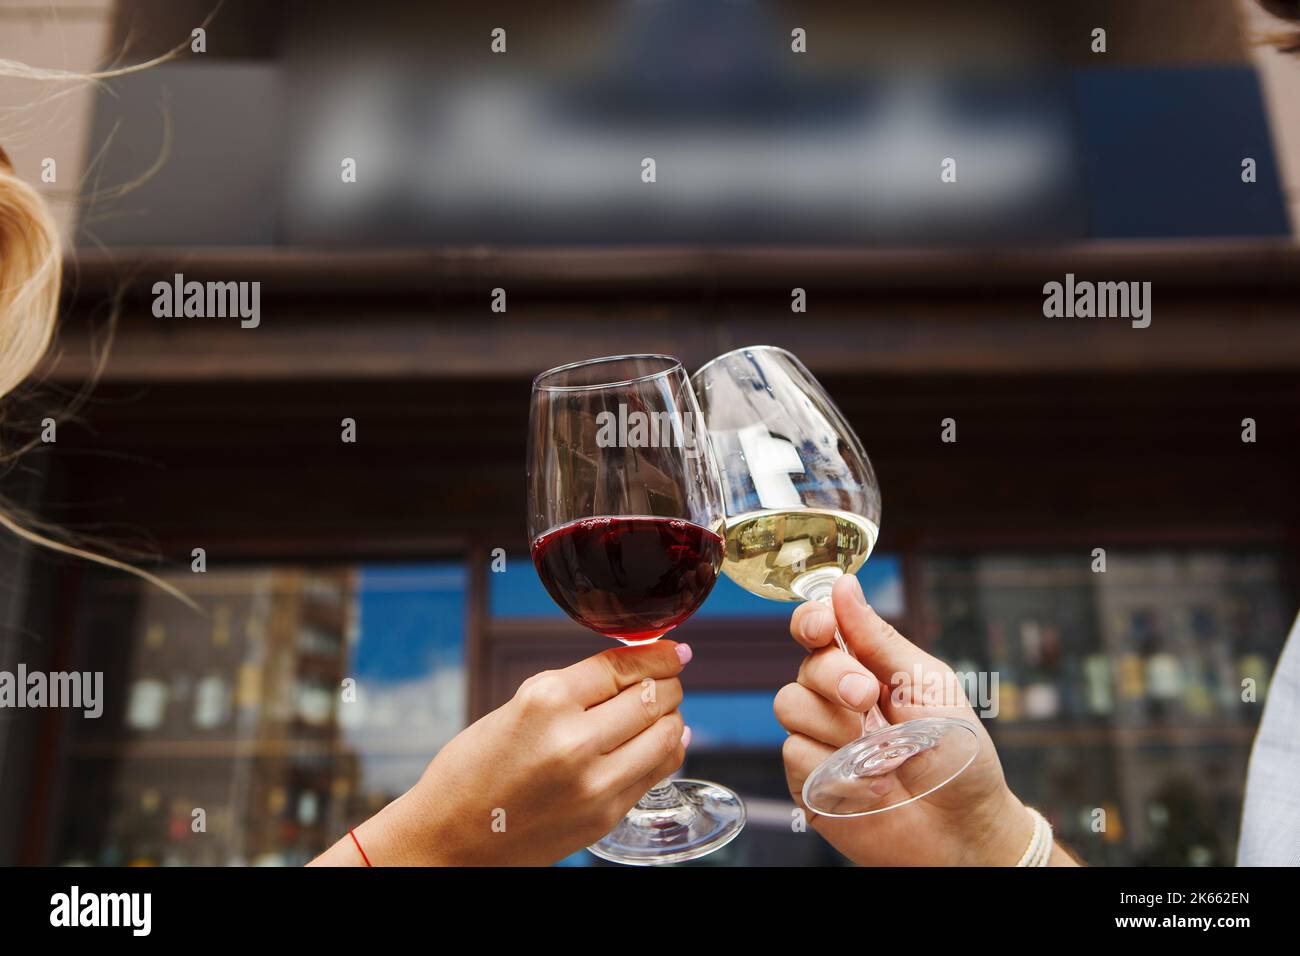 https://c8.alamy.com/comp/2K662EN/two-people-clinking-glasses-with-red-and-white-wine-2K662EN.jpg